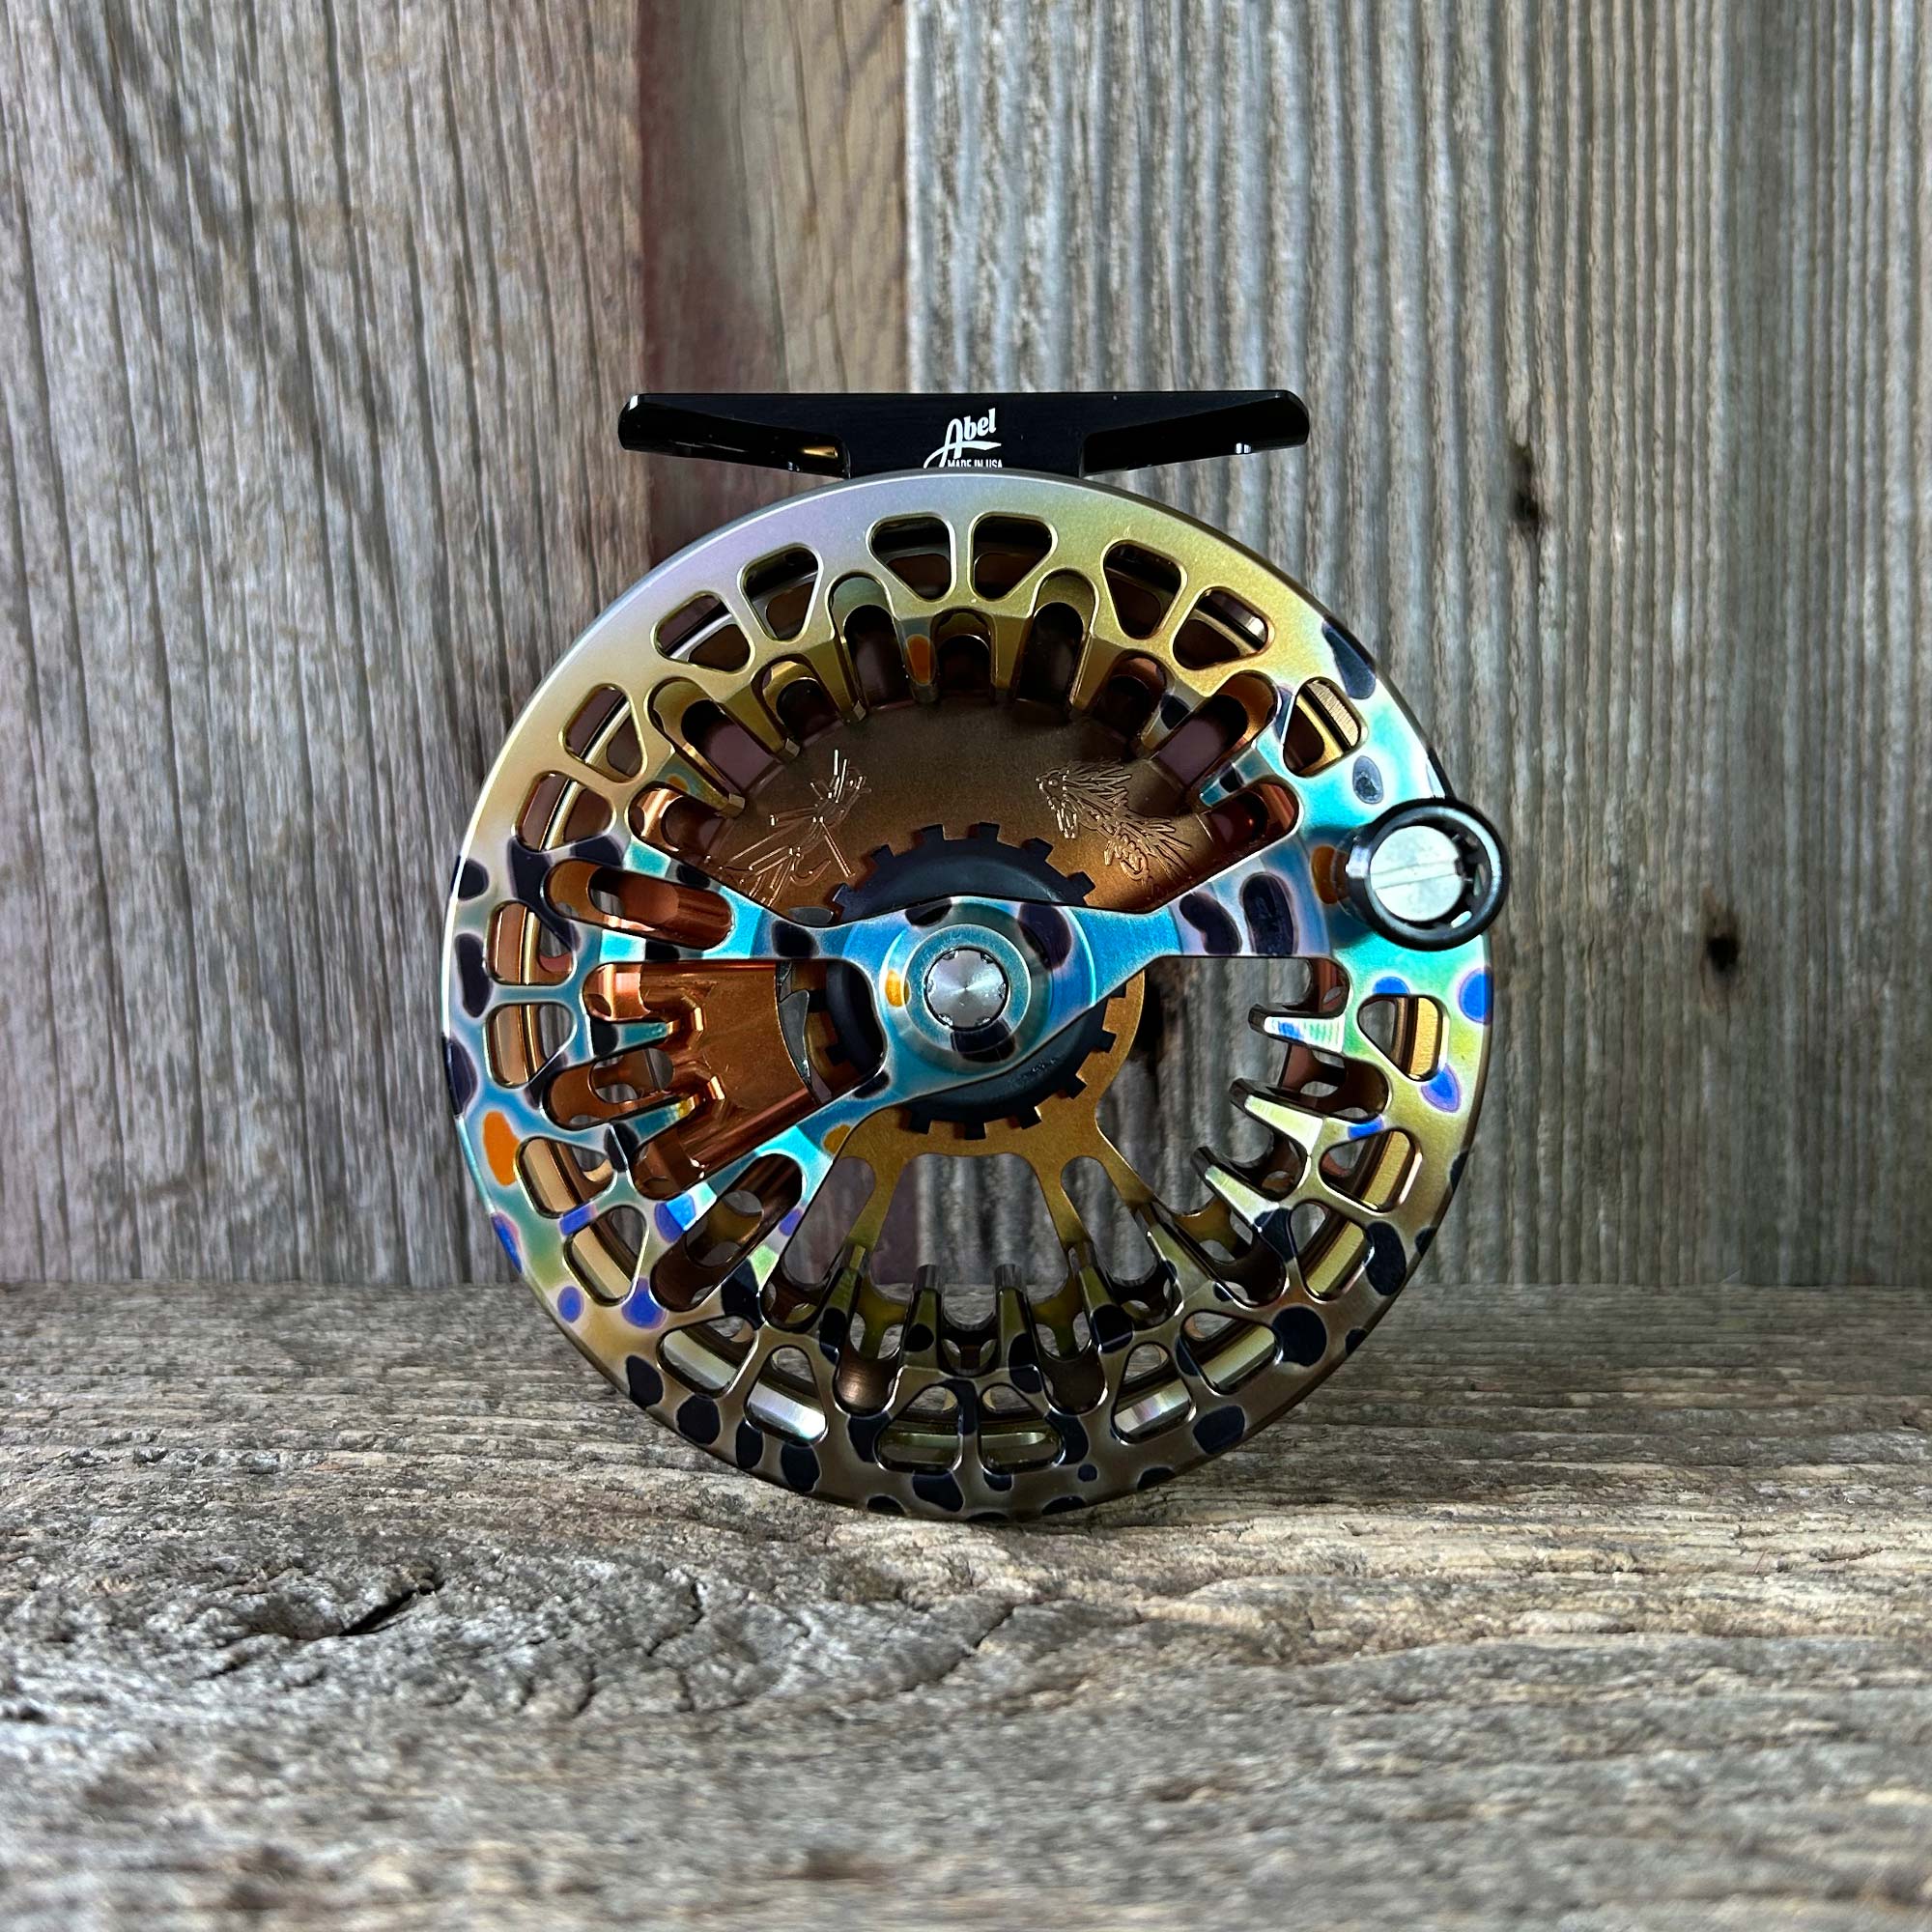 Abel Vaya NATIVE BROWN Fly Reels - The Fly Fishing Outpost